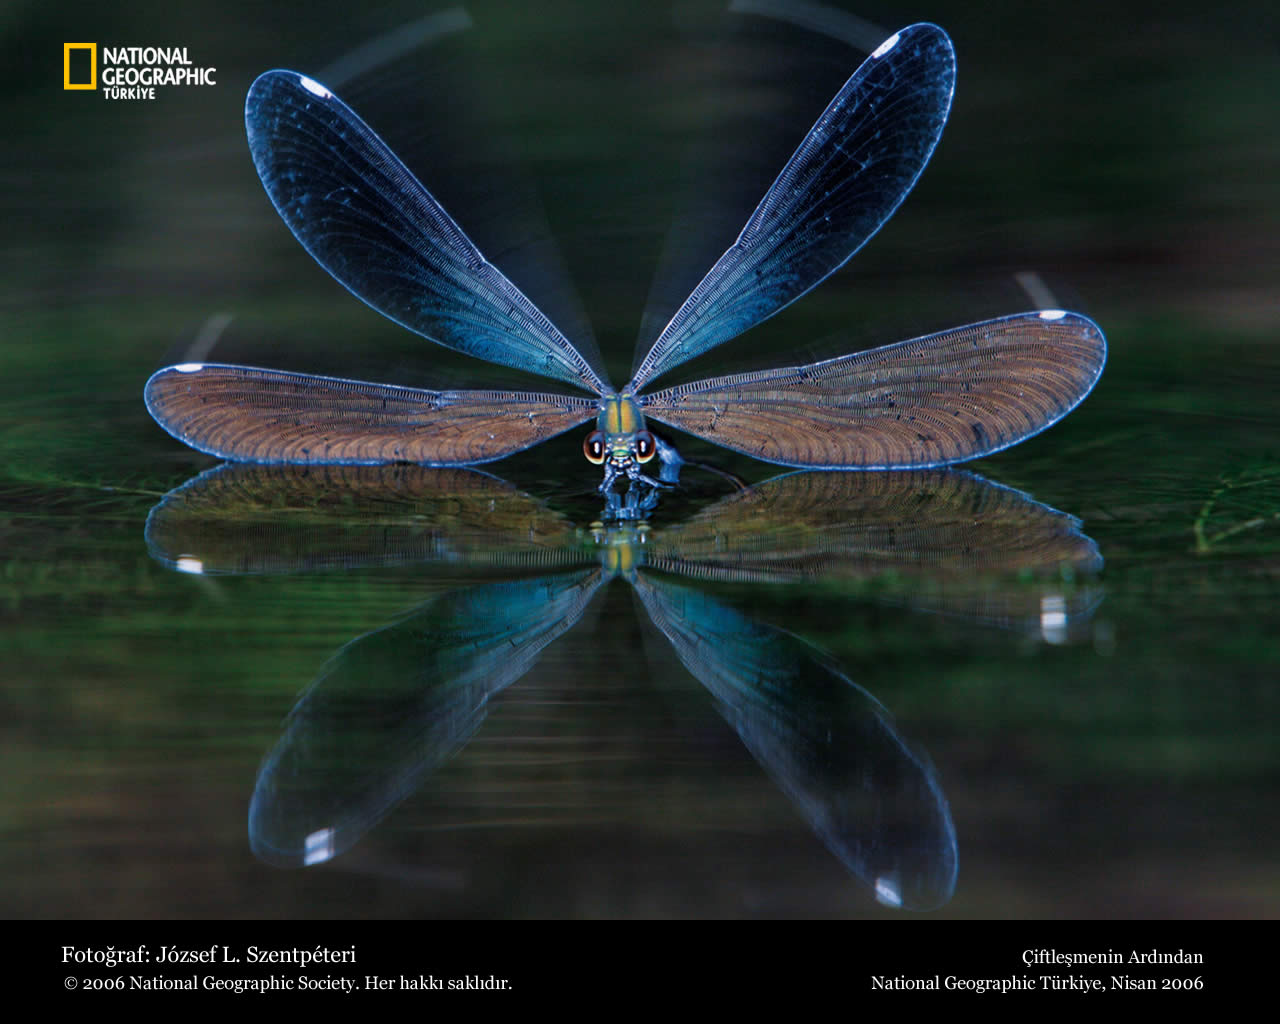 Funny Dragonfly Wallpaper For Desktop - Dragonfly Pictures National Geographic , HD Wallpaper & Backgrounds